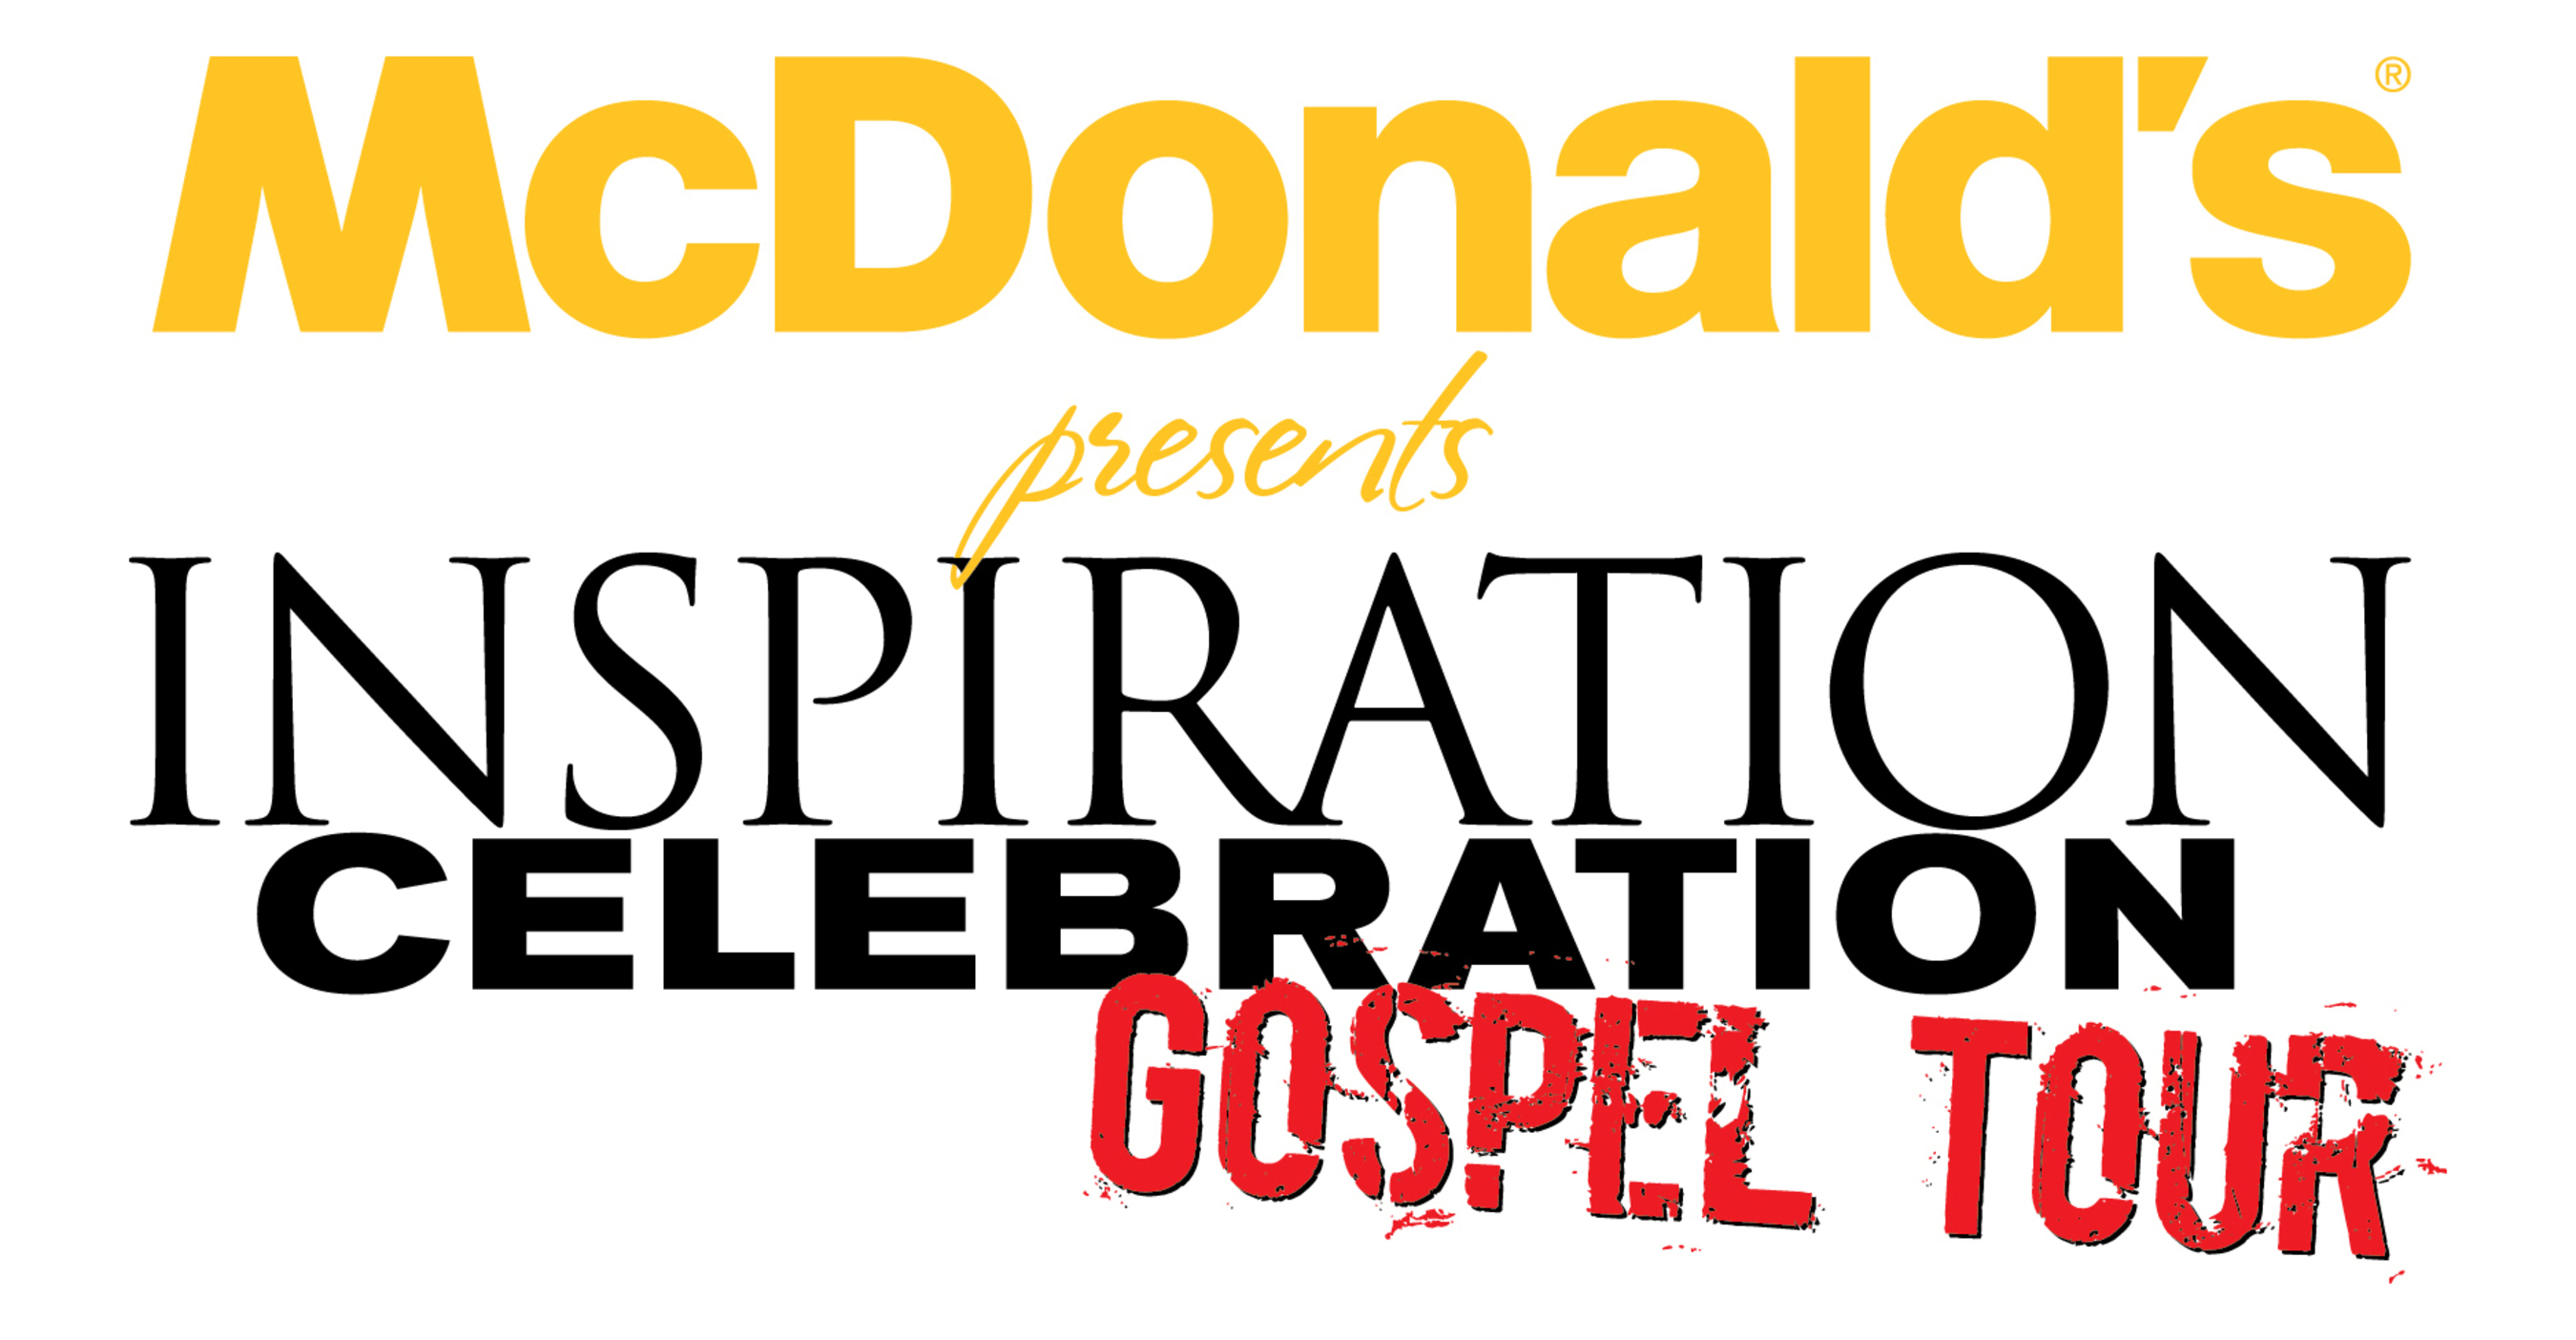 McDonald's Inspiration Celebration Gospel Tour (ICGT) is back and better than ever and features some of gospel music's biggest acts. Gospel music veteran Erica Campbell and comedian Jonathan Slocumb will co-host. Joining them will be Anthony Brown & Group TherAPy, the Mississippi Mass Choir, Uncle Reece, Moses Tyson, Jr. and Kurt Carr & The Kurt Carr Singers. Back for its eighth year, the free summer concert series sets out May 22 and runs through July 25 to deliver messages of hope and inspiration to communities nationwide and supports the Ronald McDonald House Charities (RMHC). (PRNewsFoto/McDonald's USA)